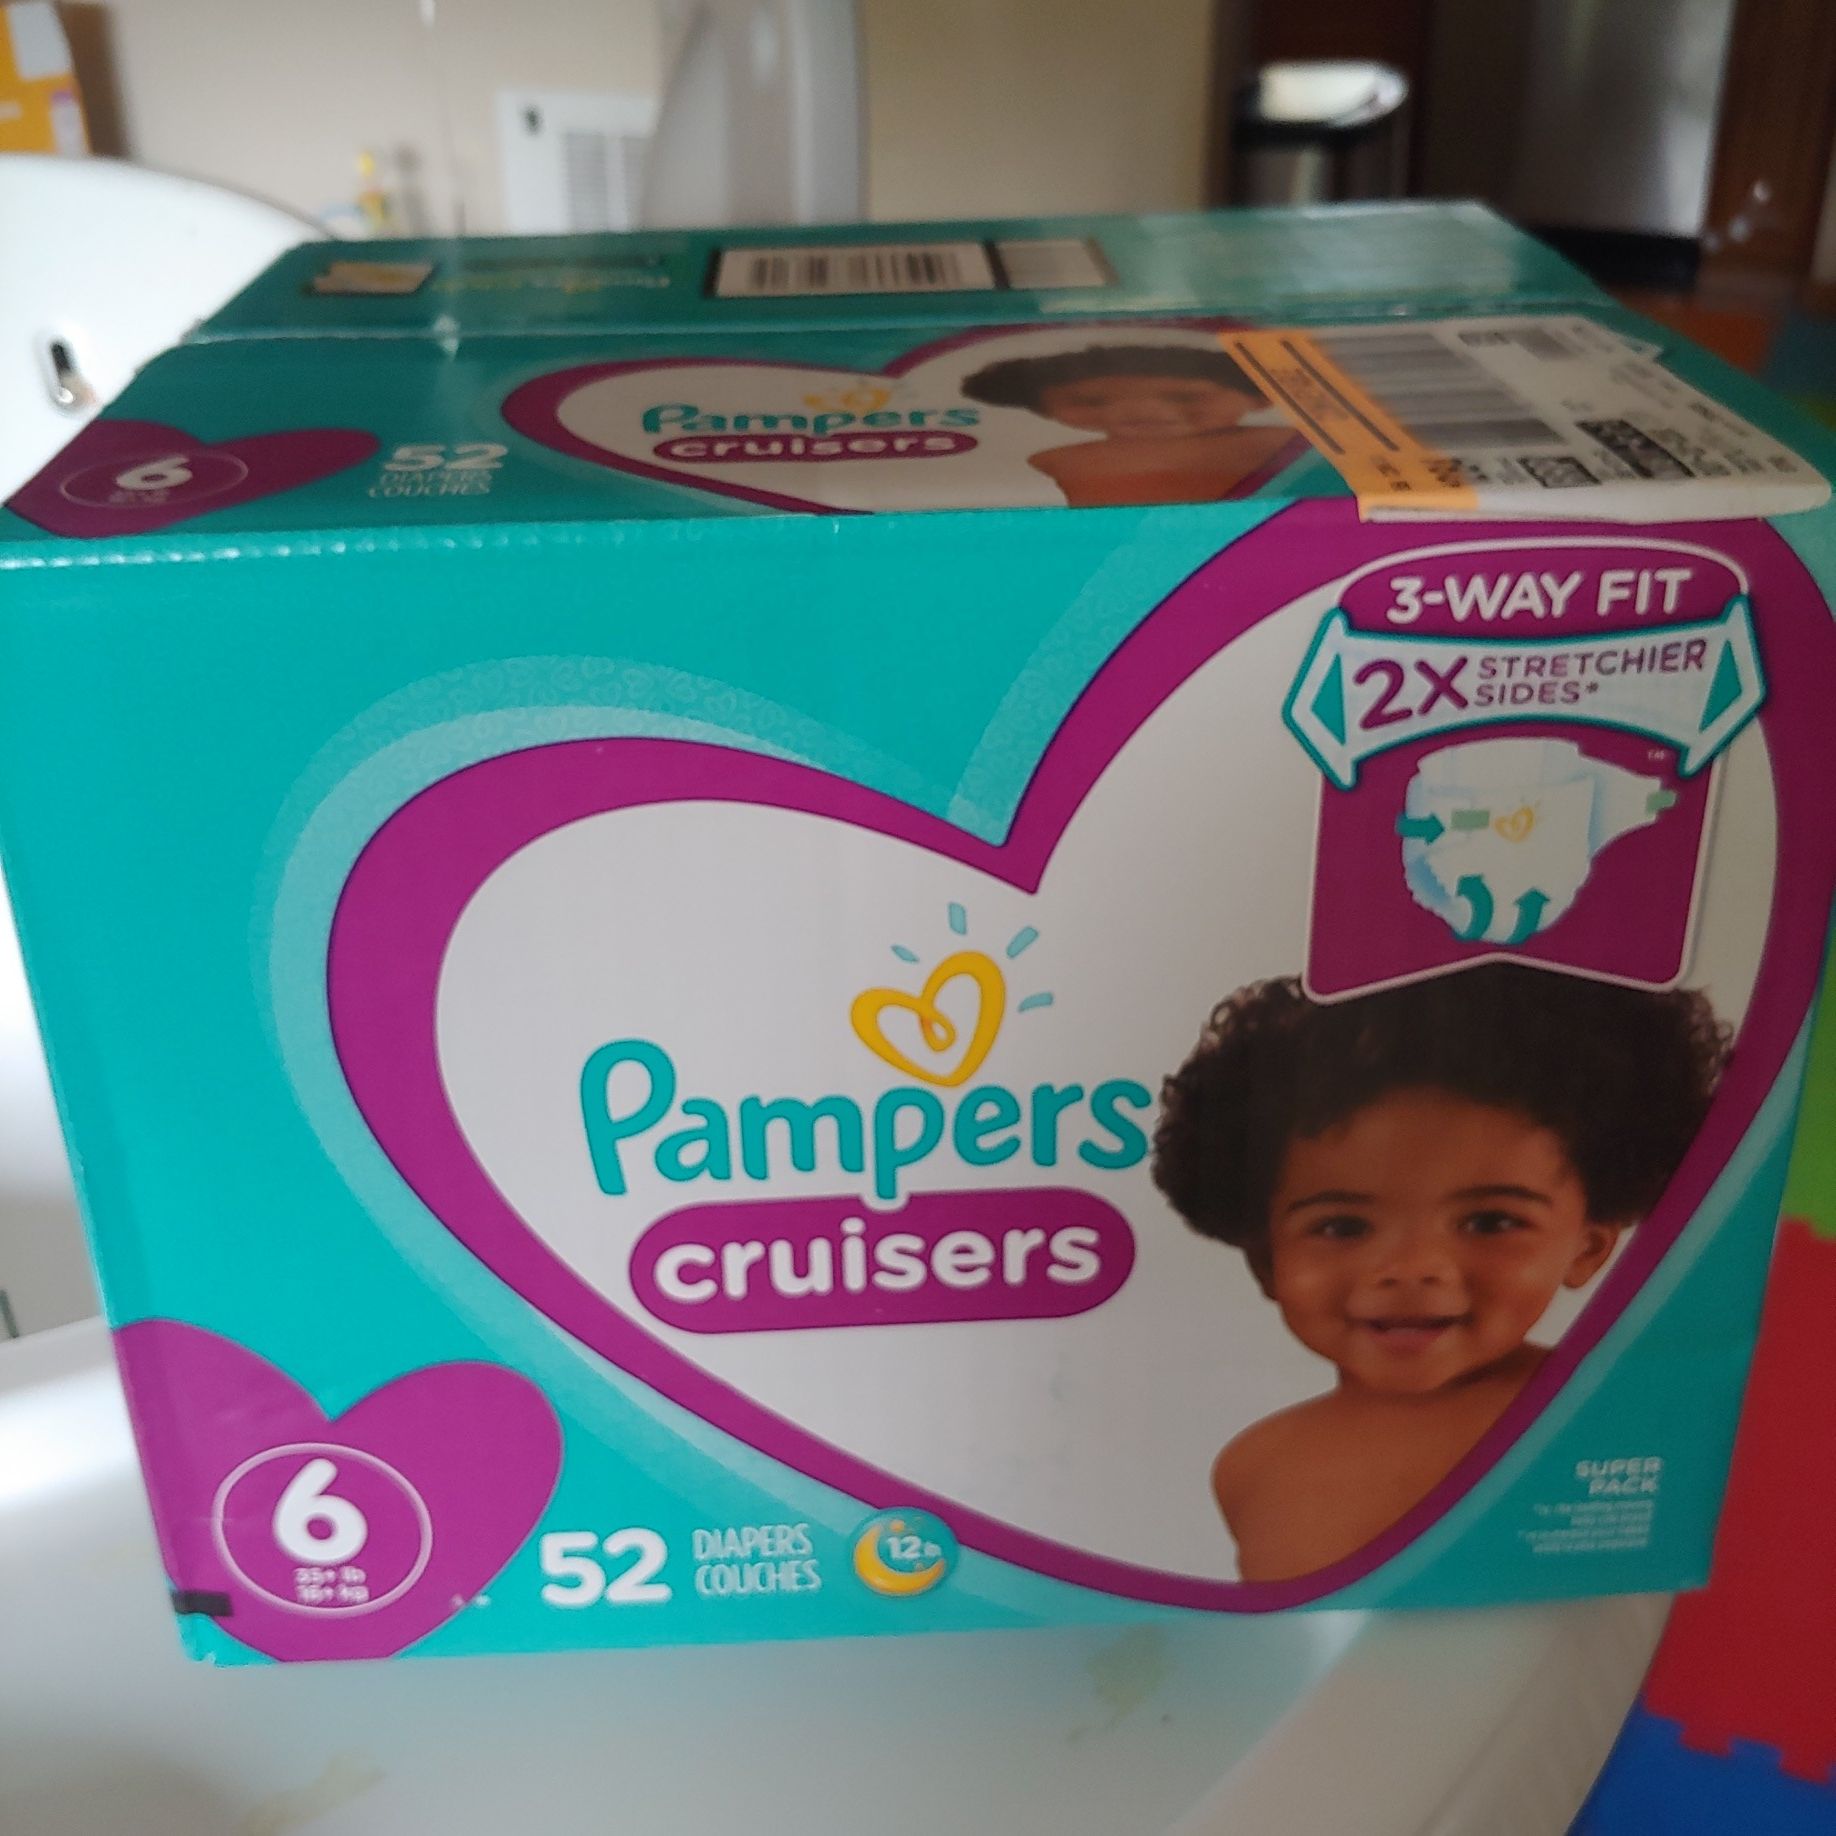 Pampers cruisers - size 6